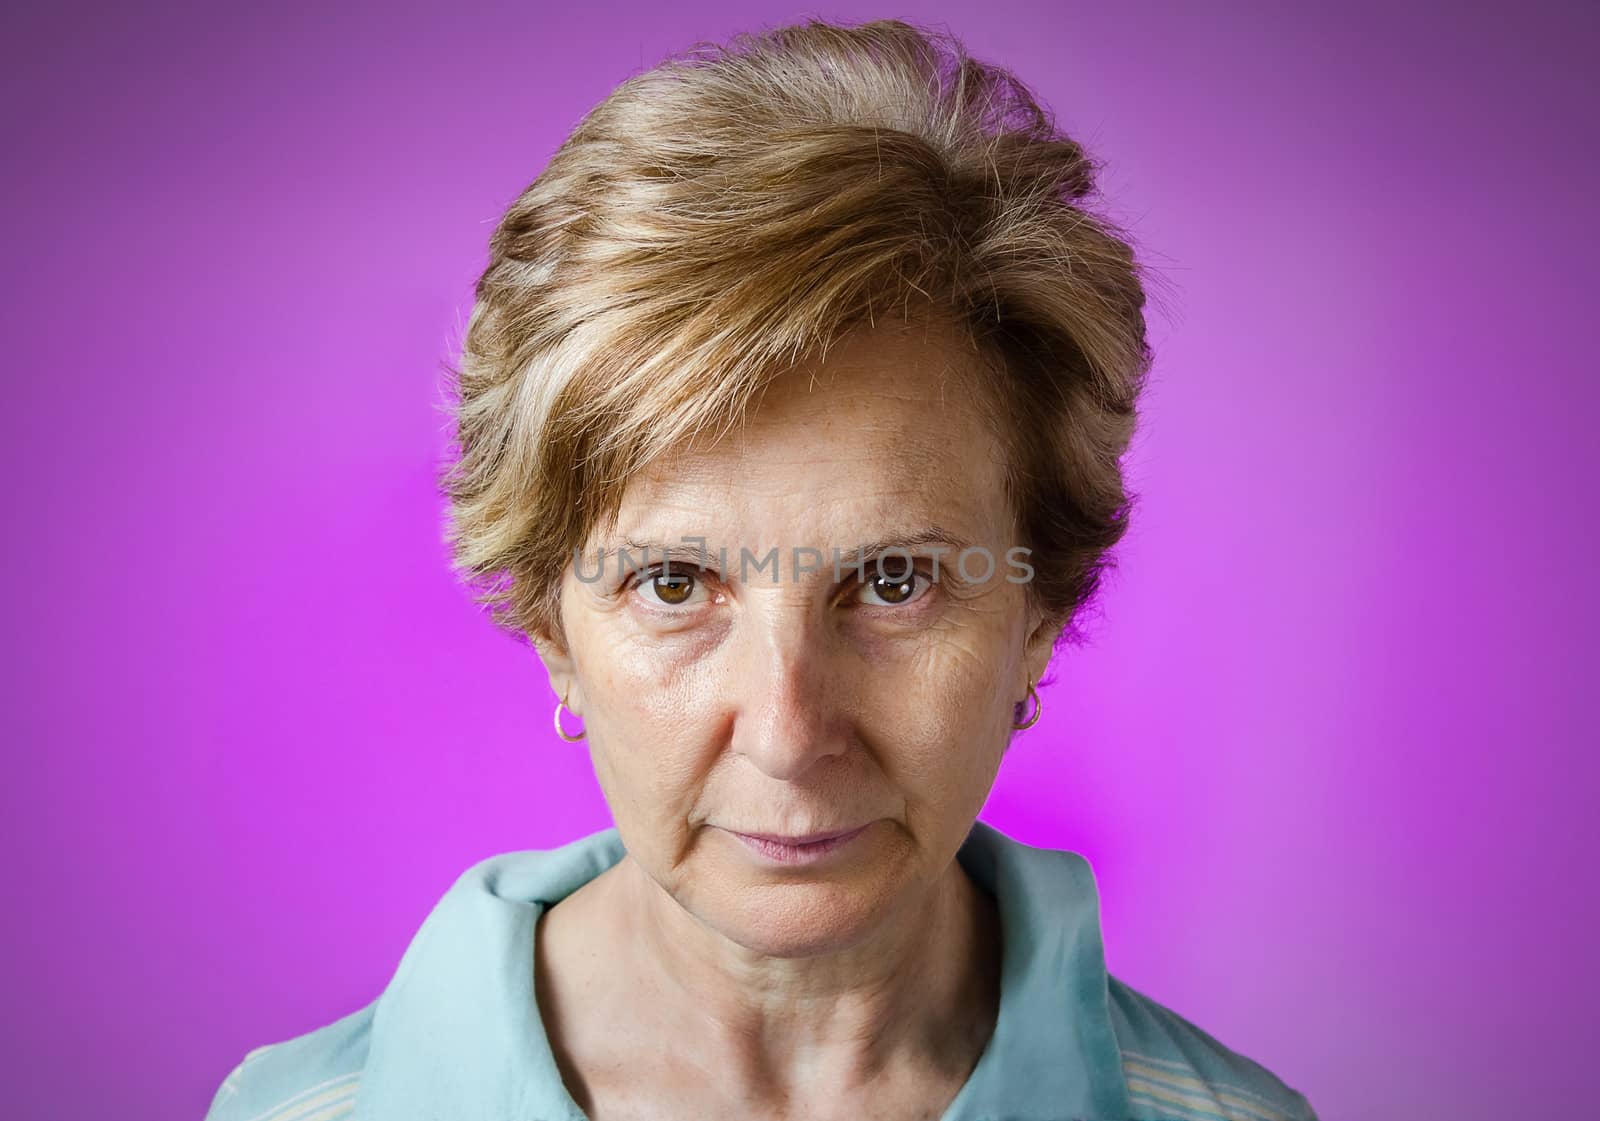 Real serious woman portrait over purple background by doble.d